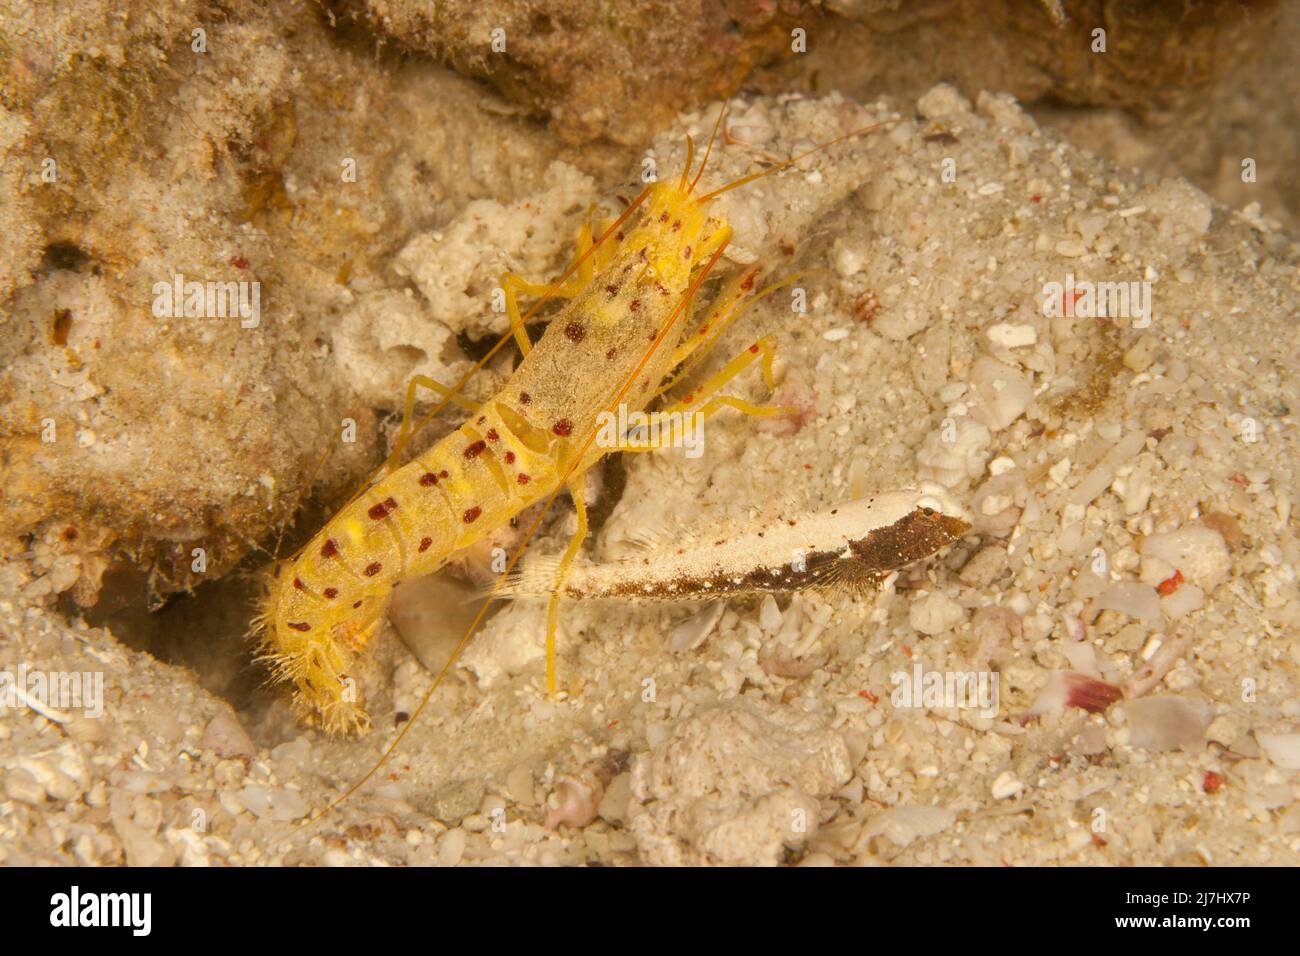 A juvenile saddled shrimpgoby, Cryptocentrus leucostictus, living in a symbiotic relationship with a blind snapping shrimp, Alpheus sp. not yet named Stock Photo